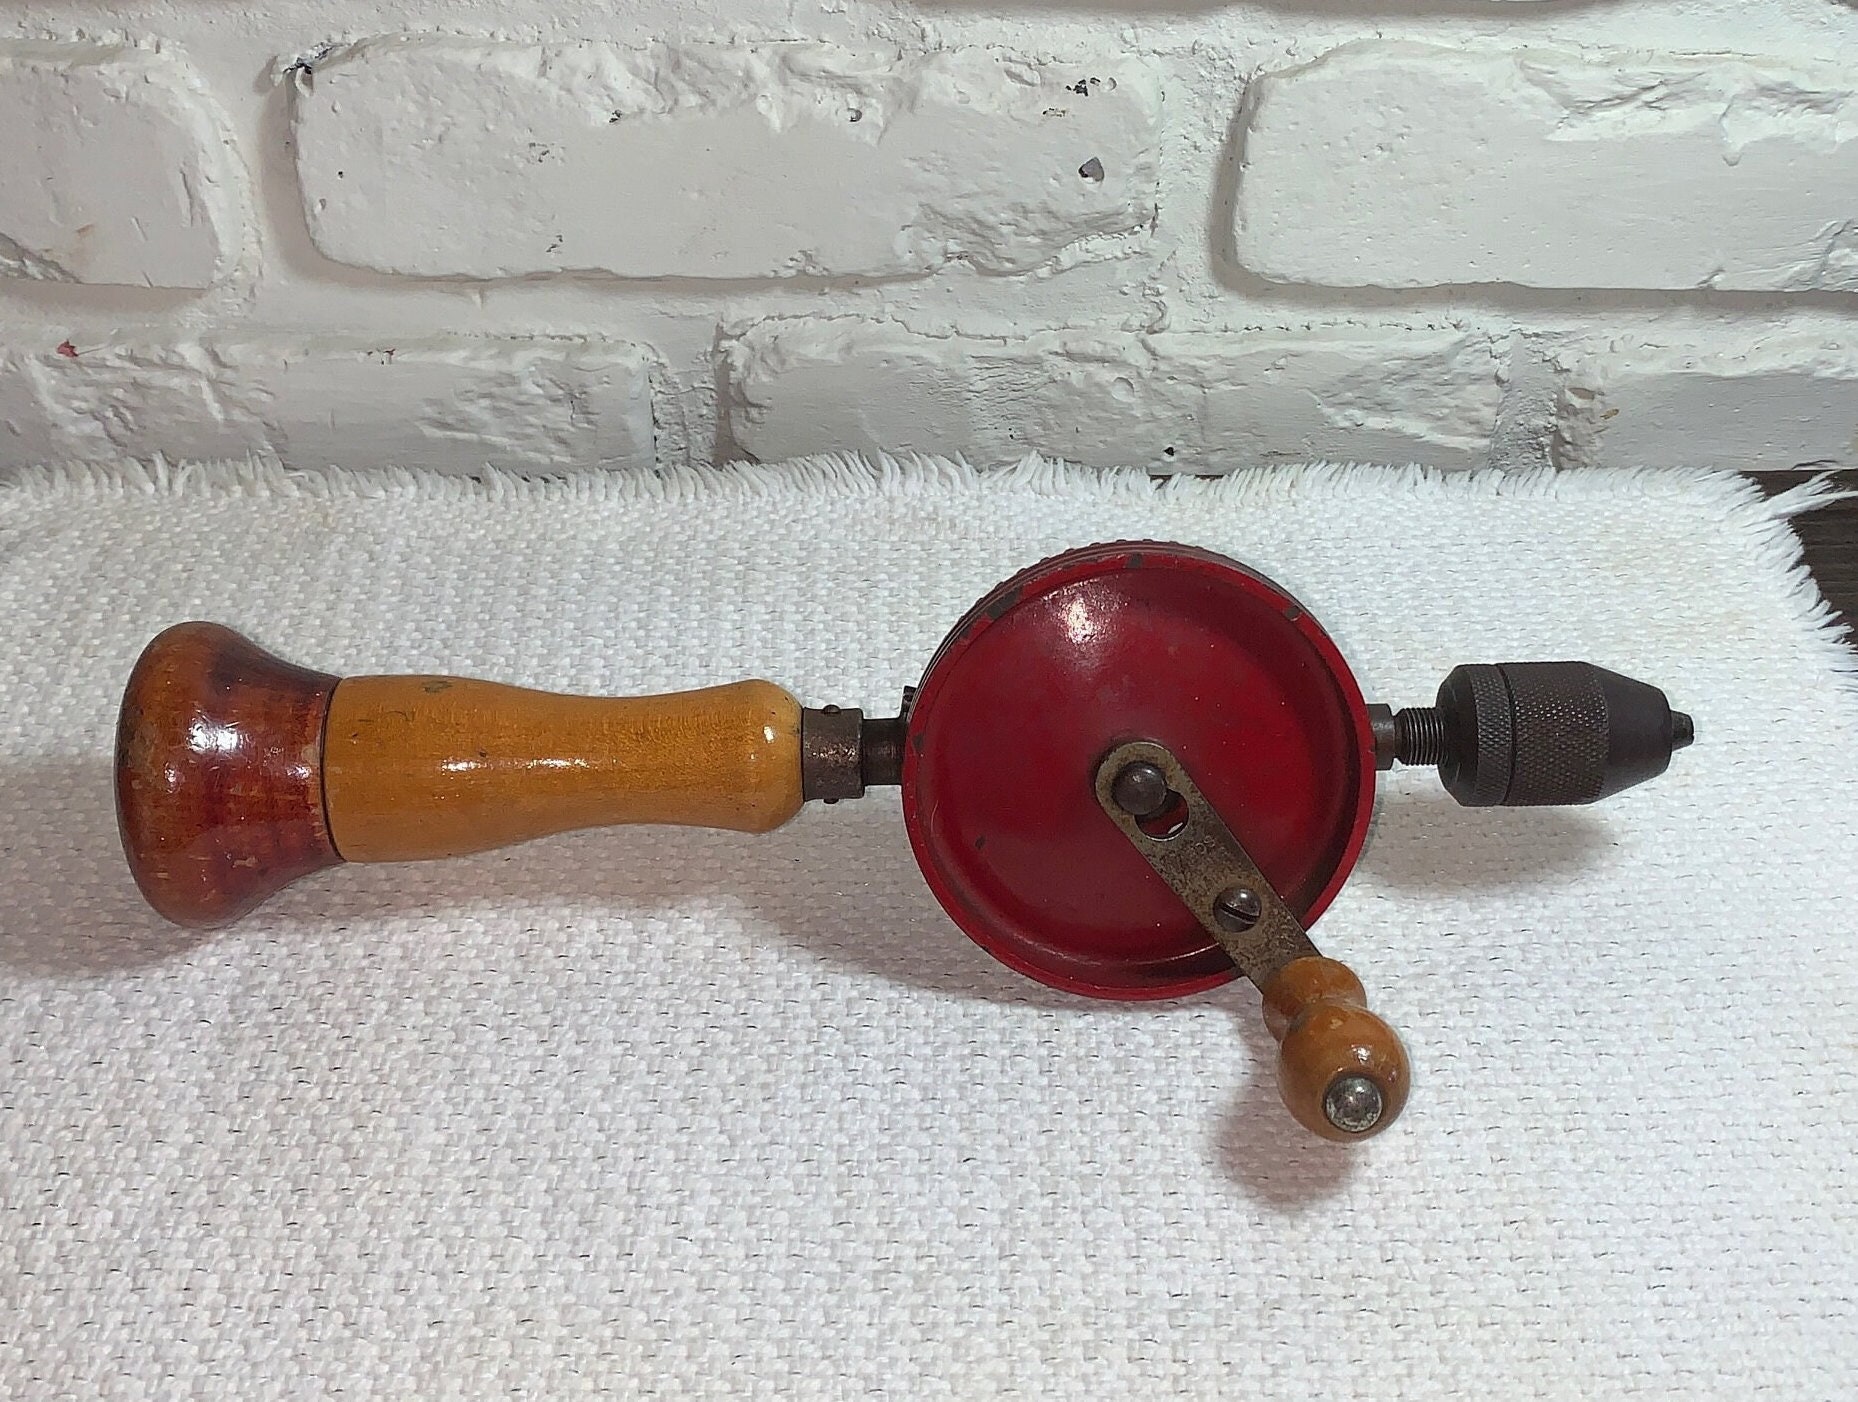 Vintage STANLEY No. 1221 Hand Drill - Made in USA